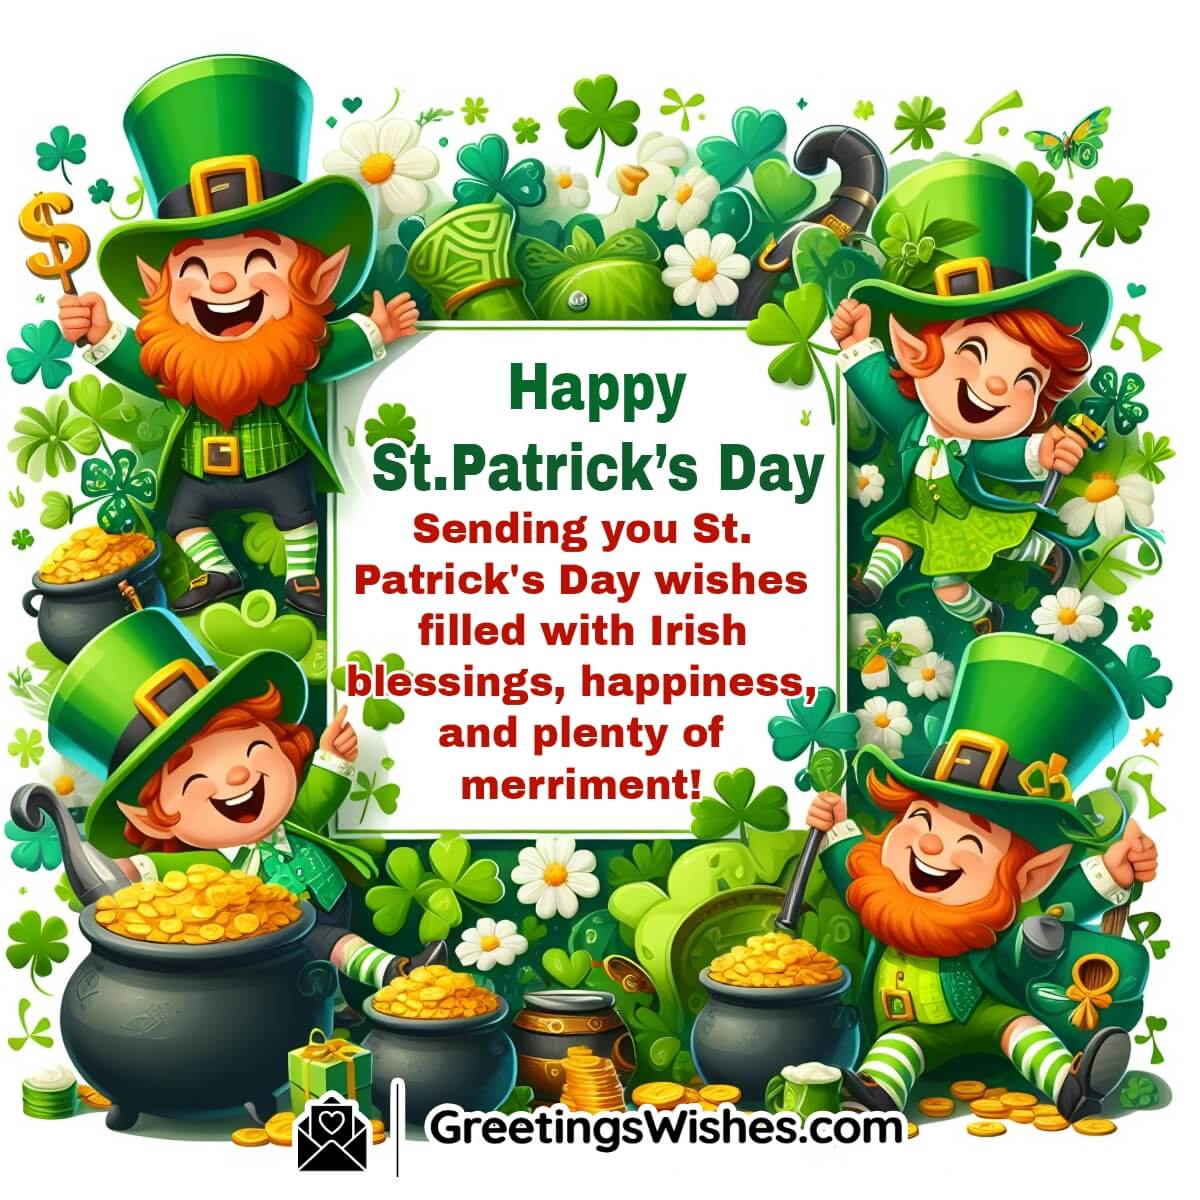 Happy St. Patrick’s Day Wishes Card